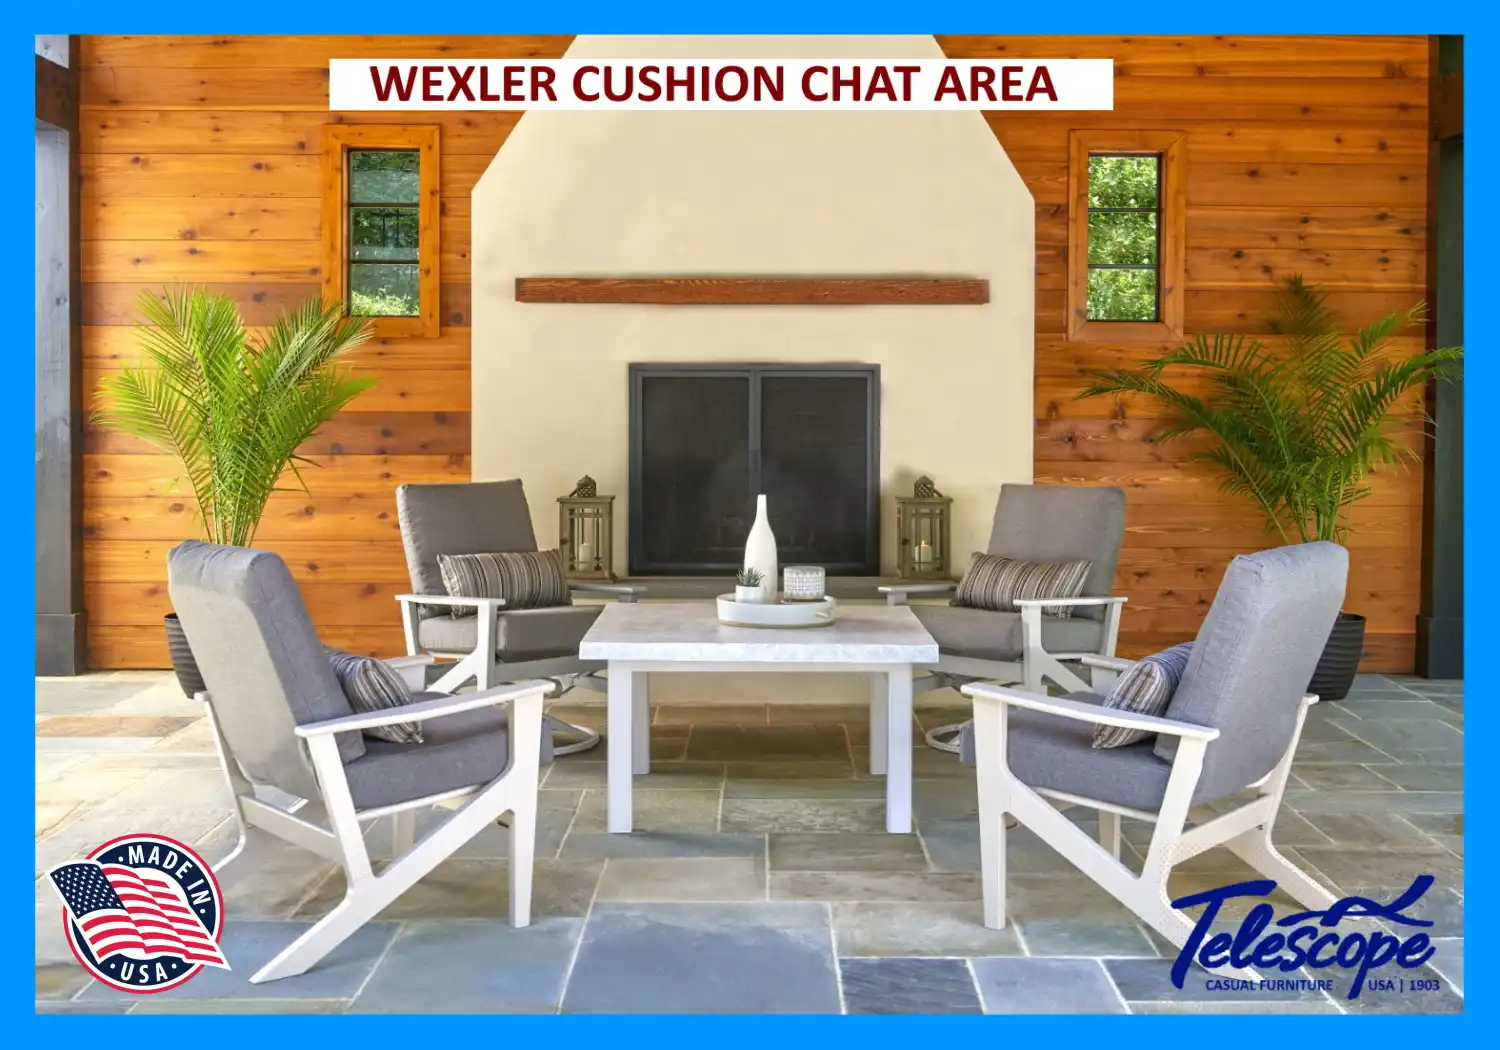 WEXLER CUSHION CHAT AREA